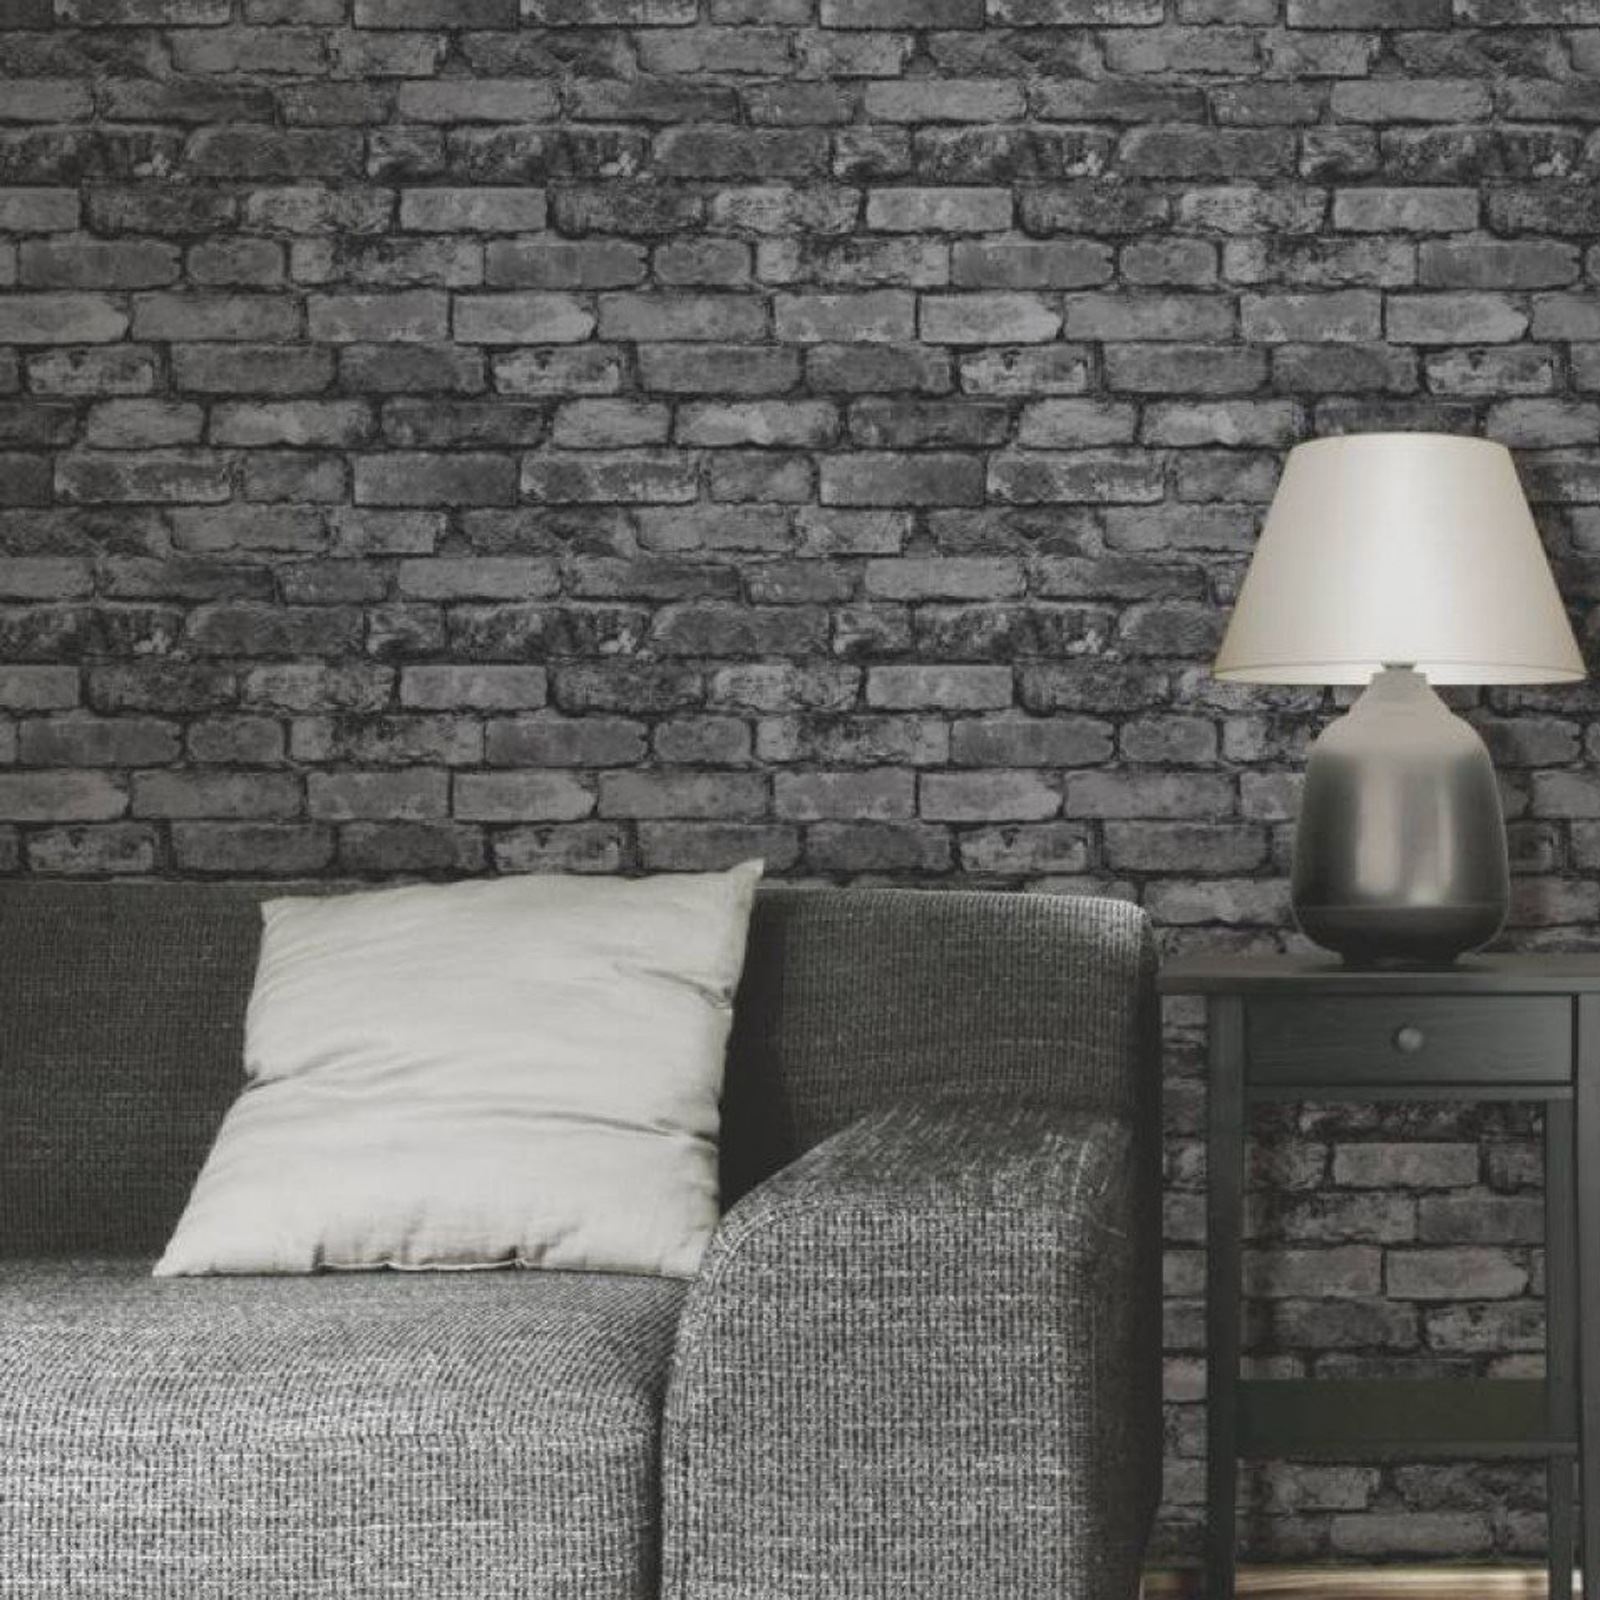 Details About Rustic Brick Effect Wallpaper 10m Charcoal Black Silver